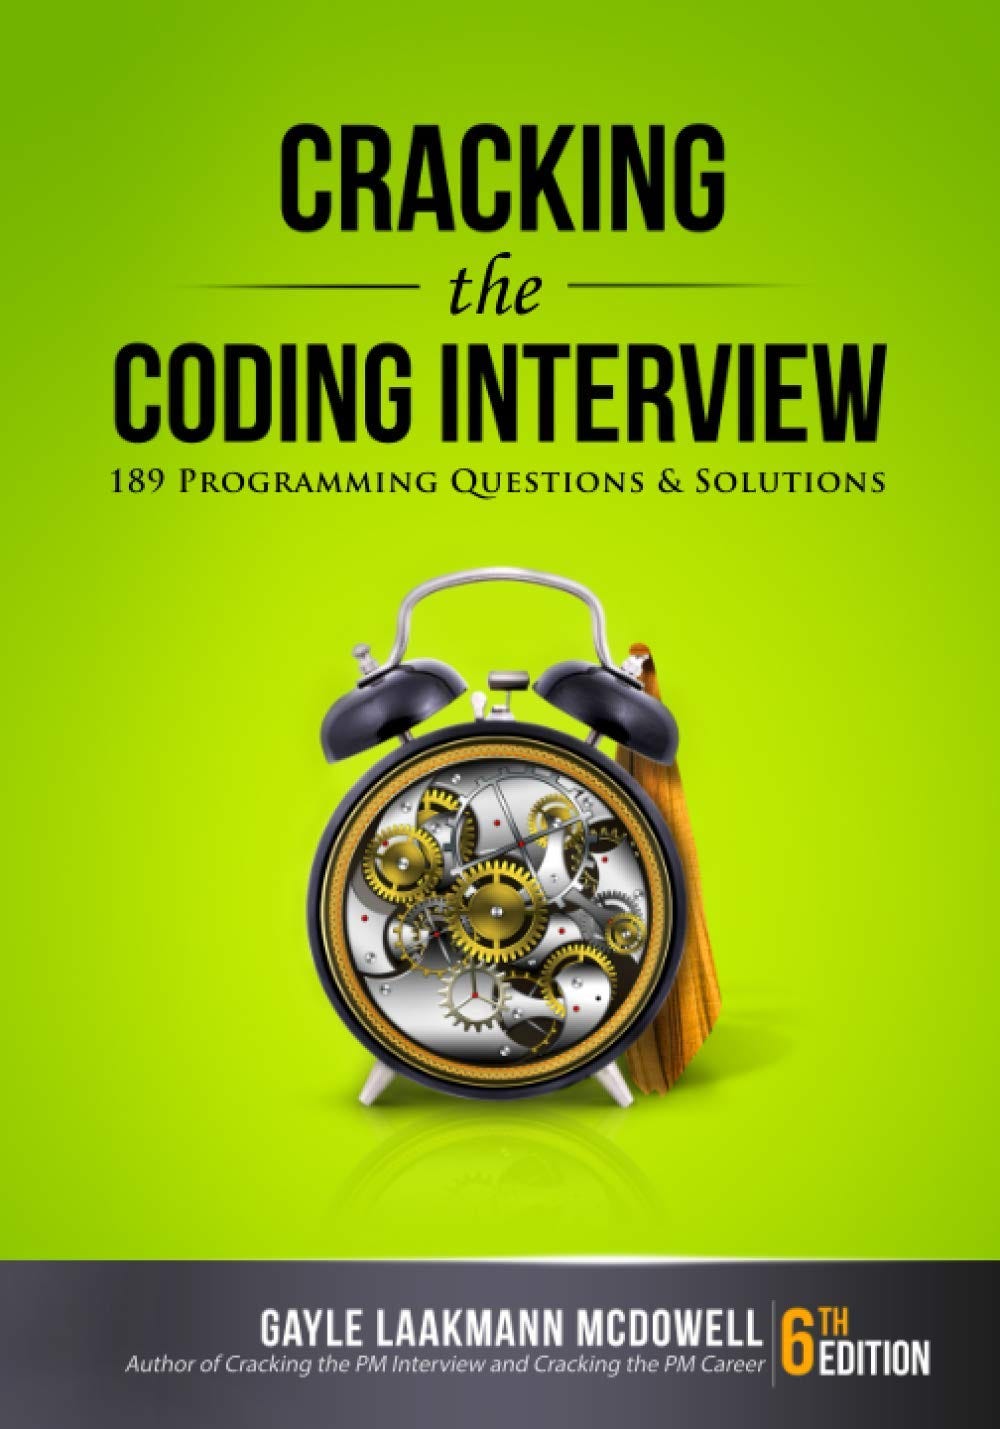 Amazon - Cracking the Coding Interview: 189 Programming Questions and  Solutions: McDowell, Gayle Laakmann: 1235264539136: Books